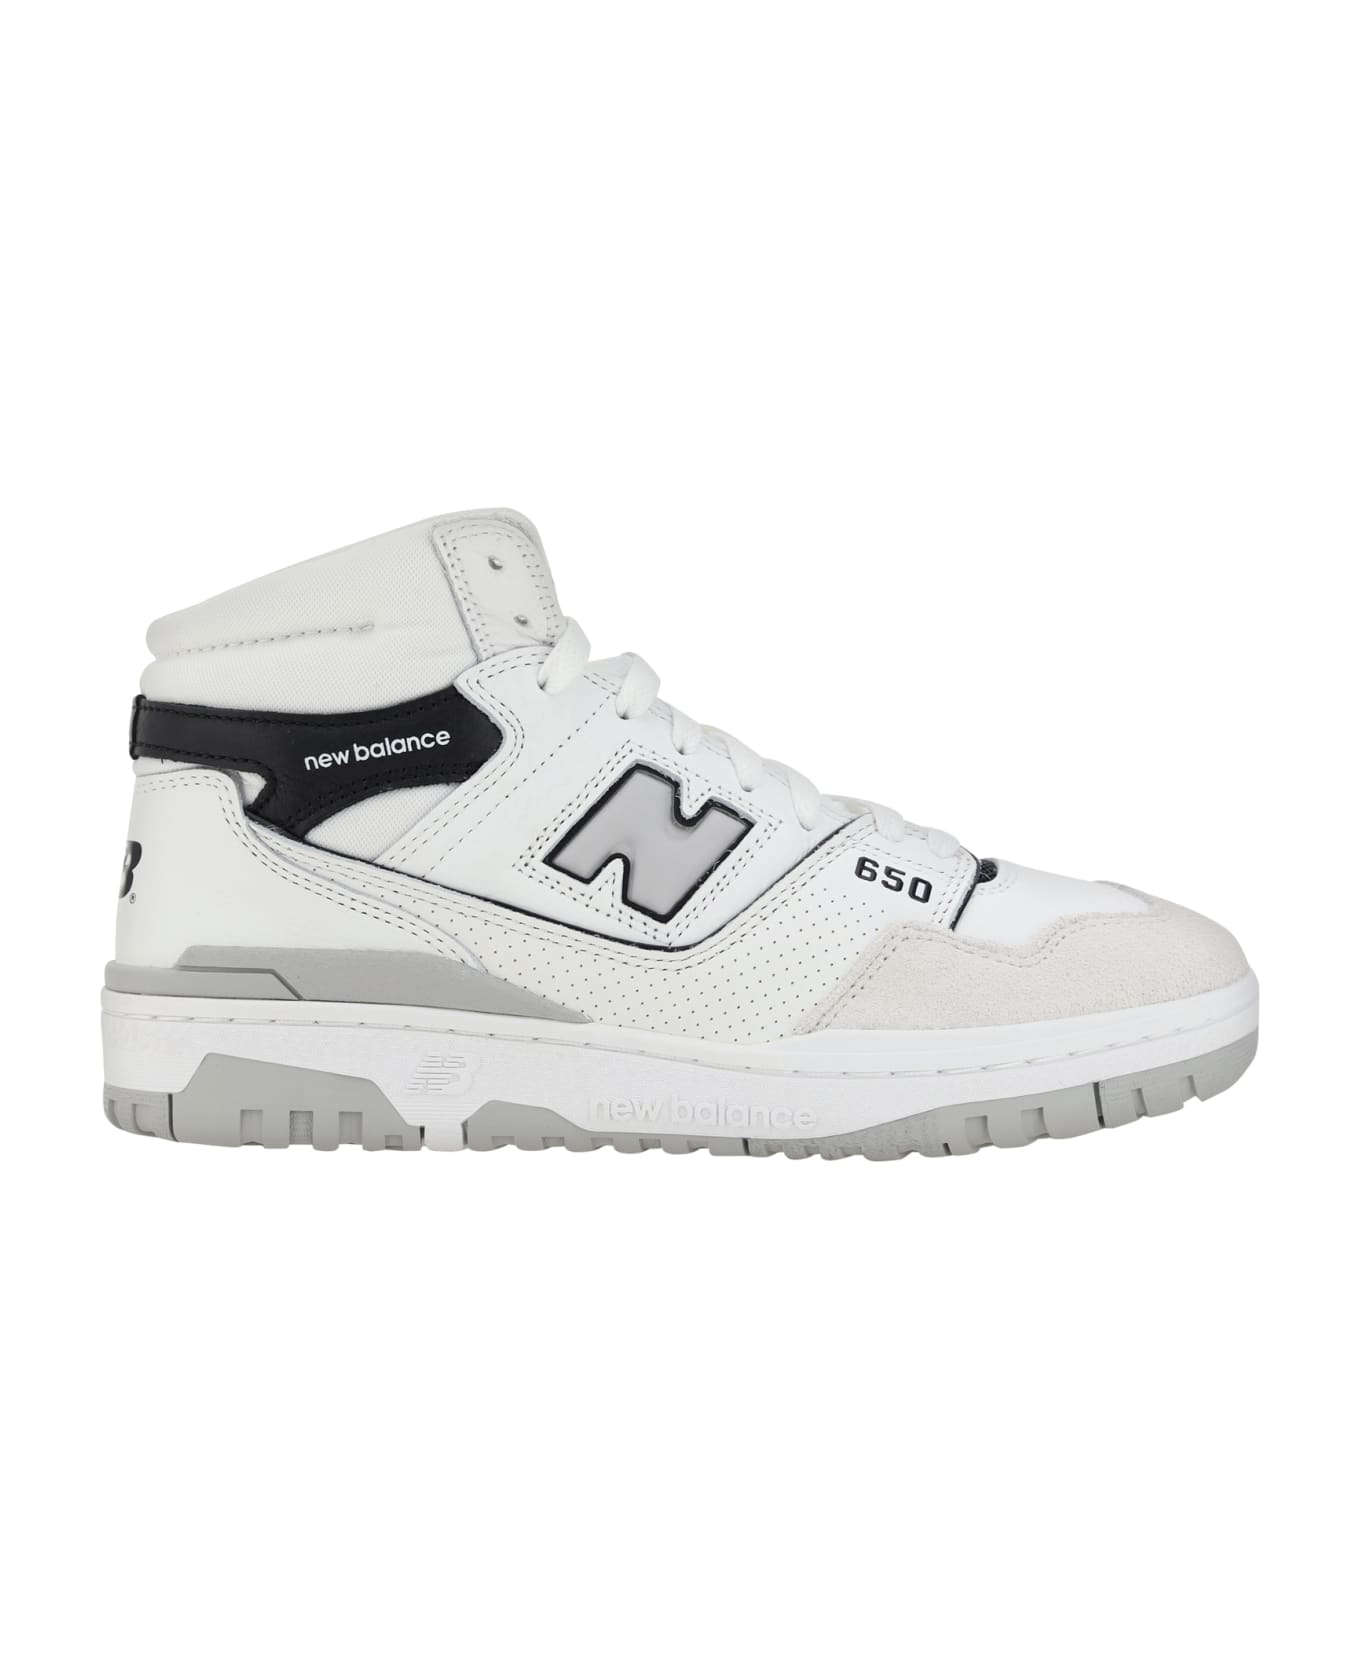 New Balance 550 Sneakers - White